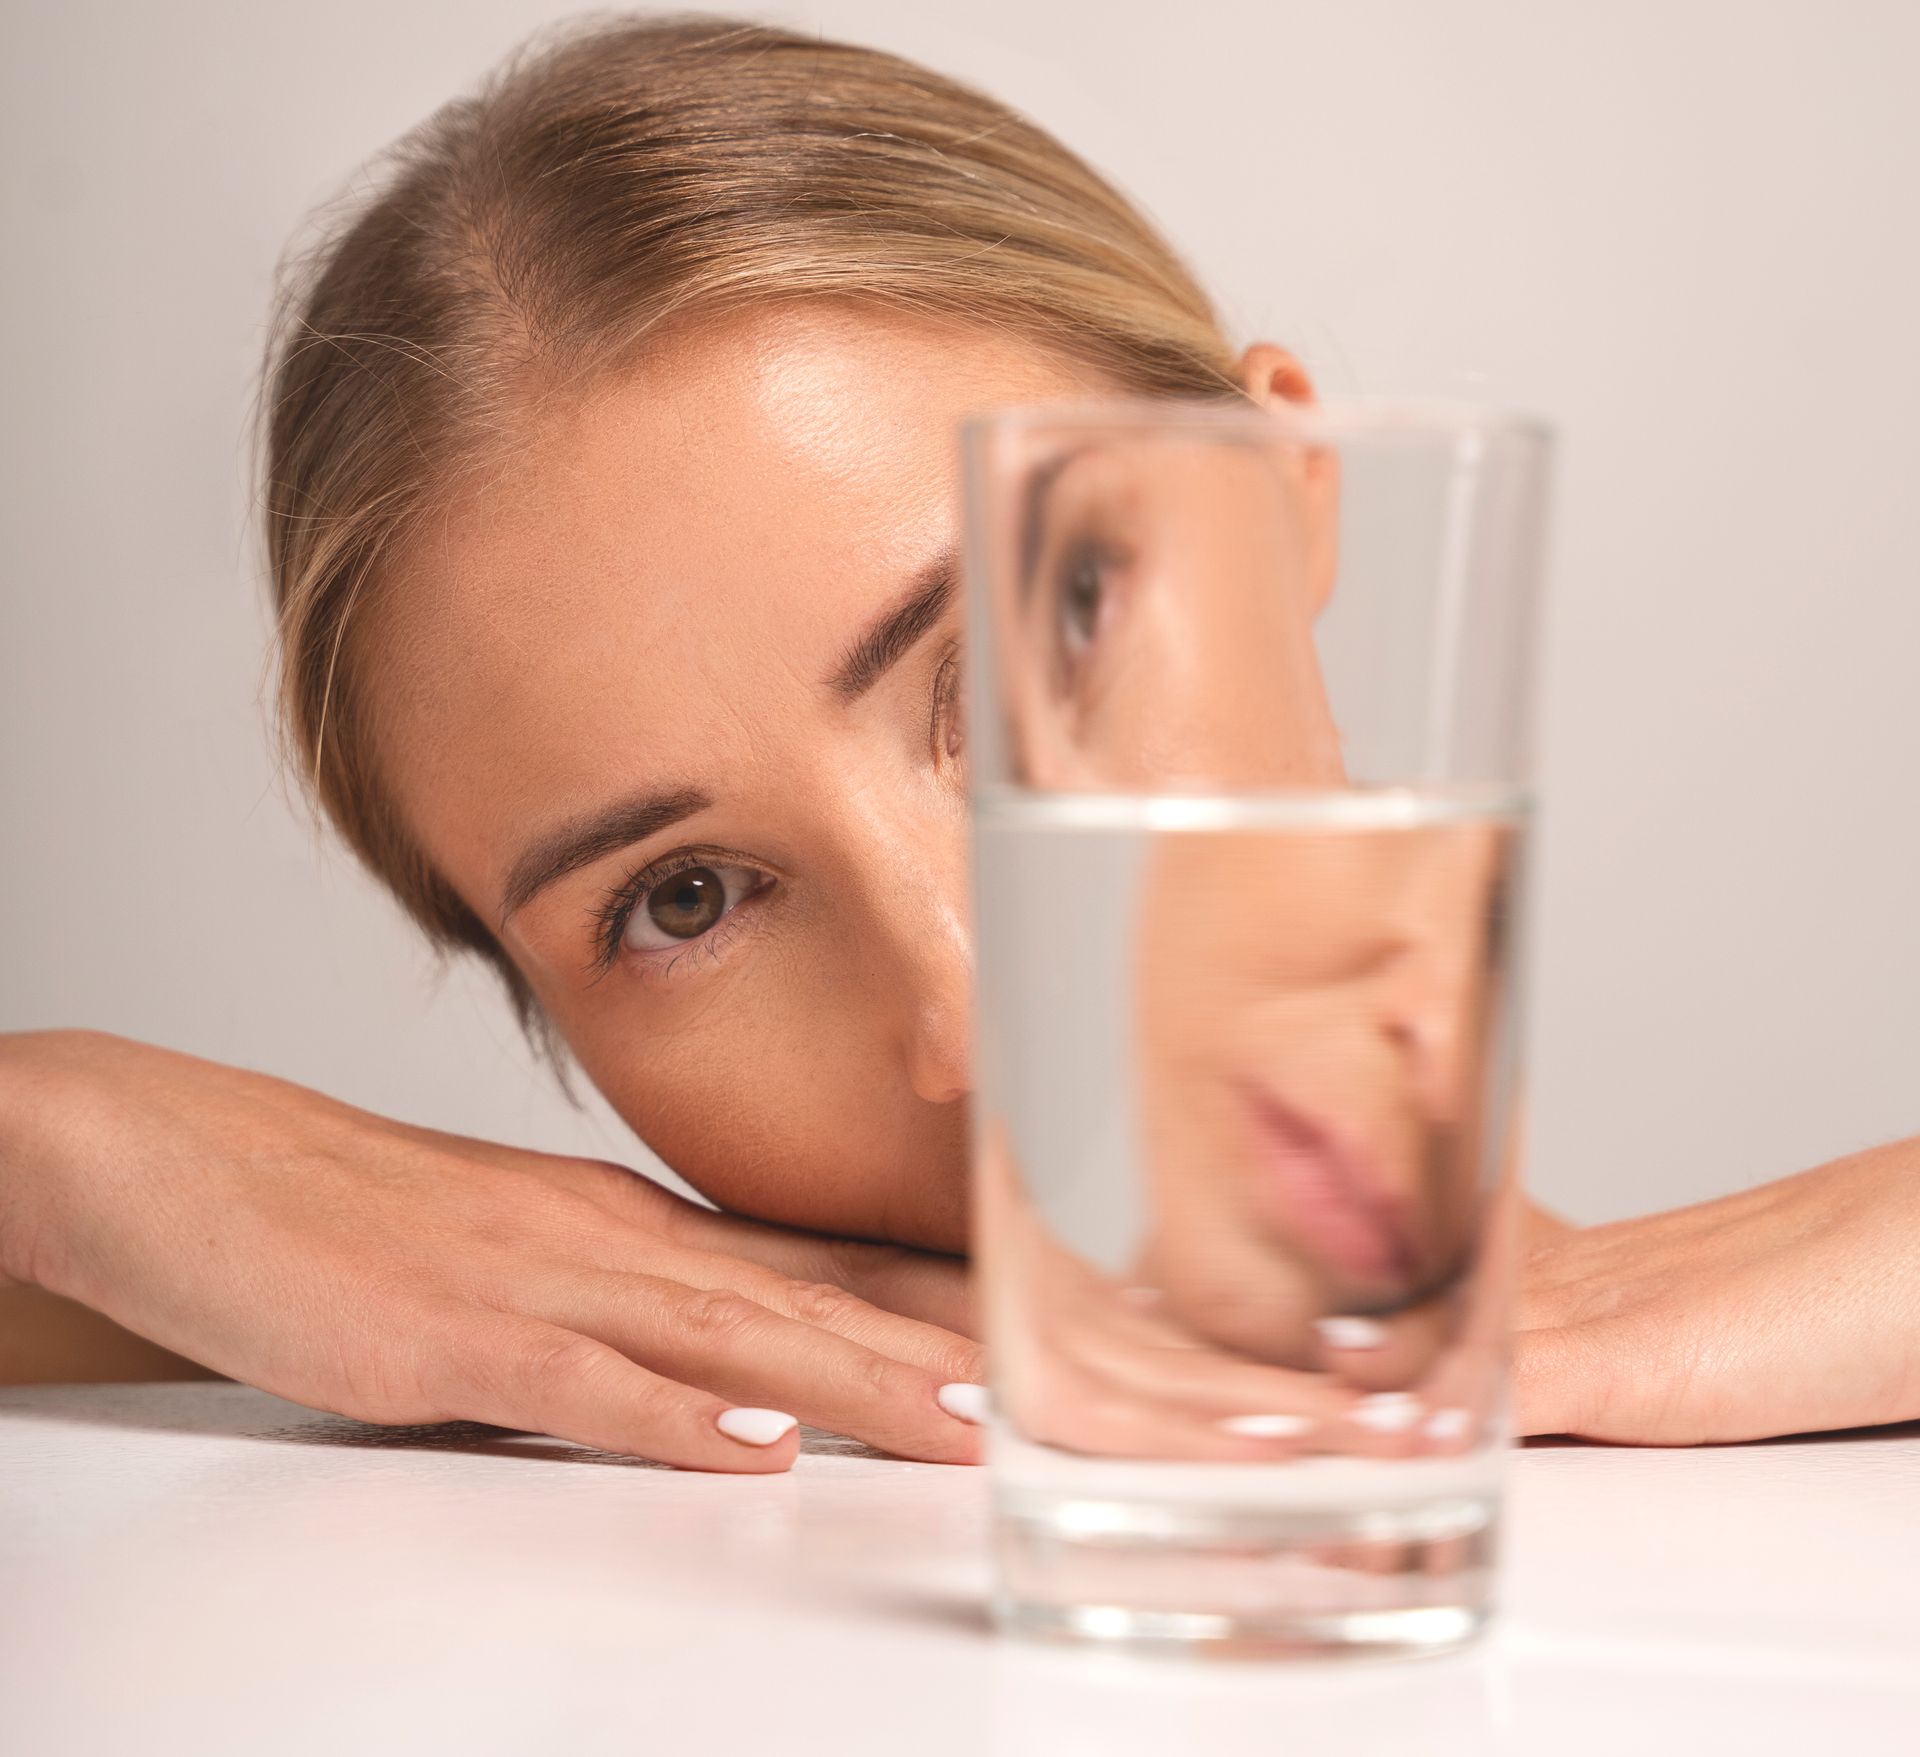 woman looks questionably through a glass of water on a table